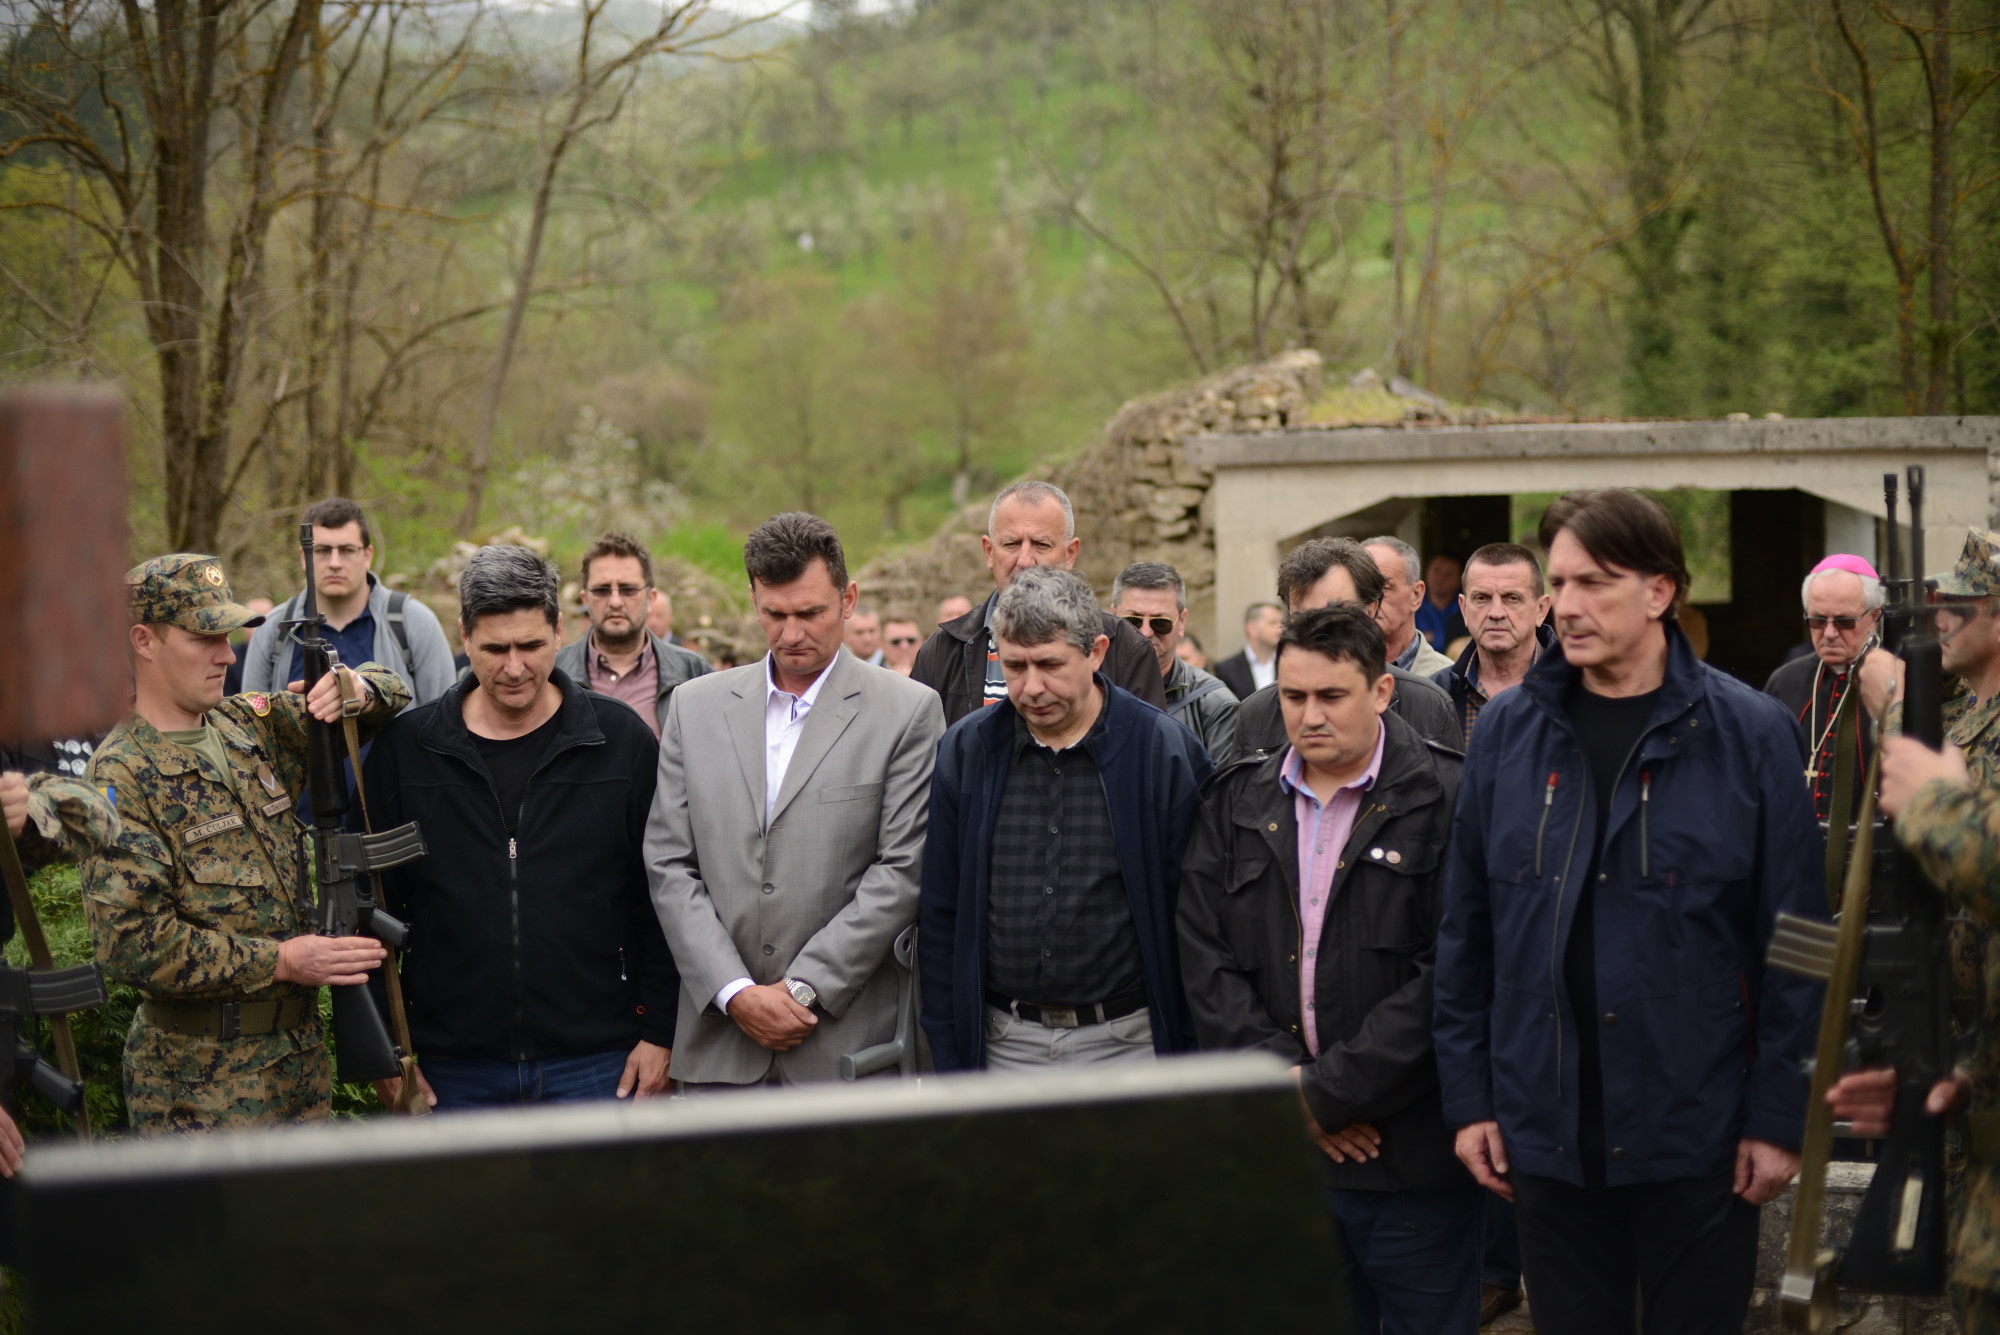 War Veterans in Trusina: Compassion Is Not Limited by Ethnicity